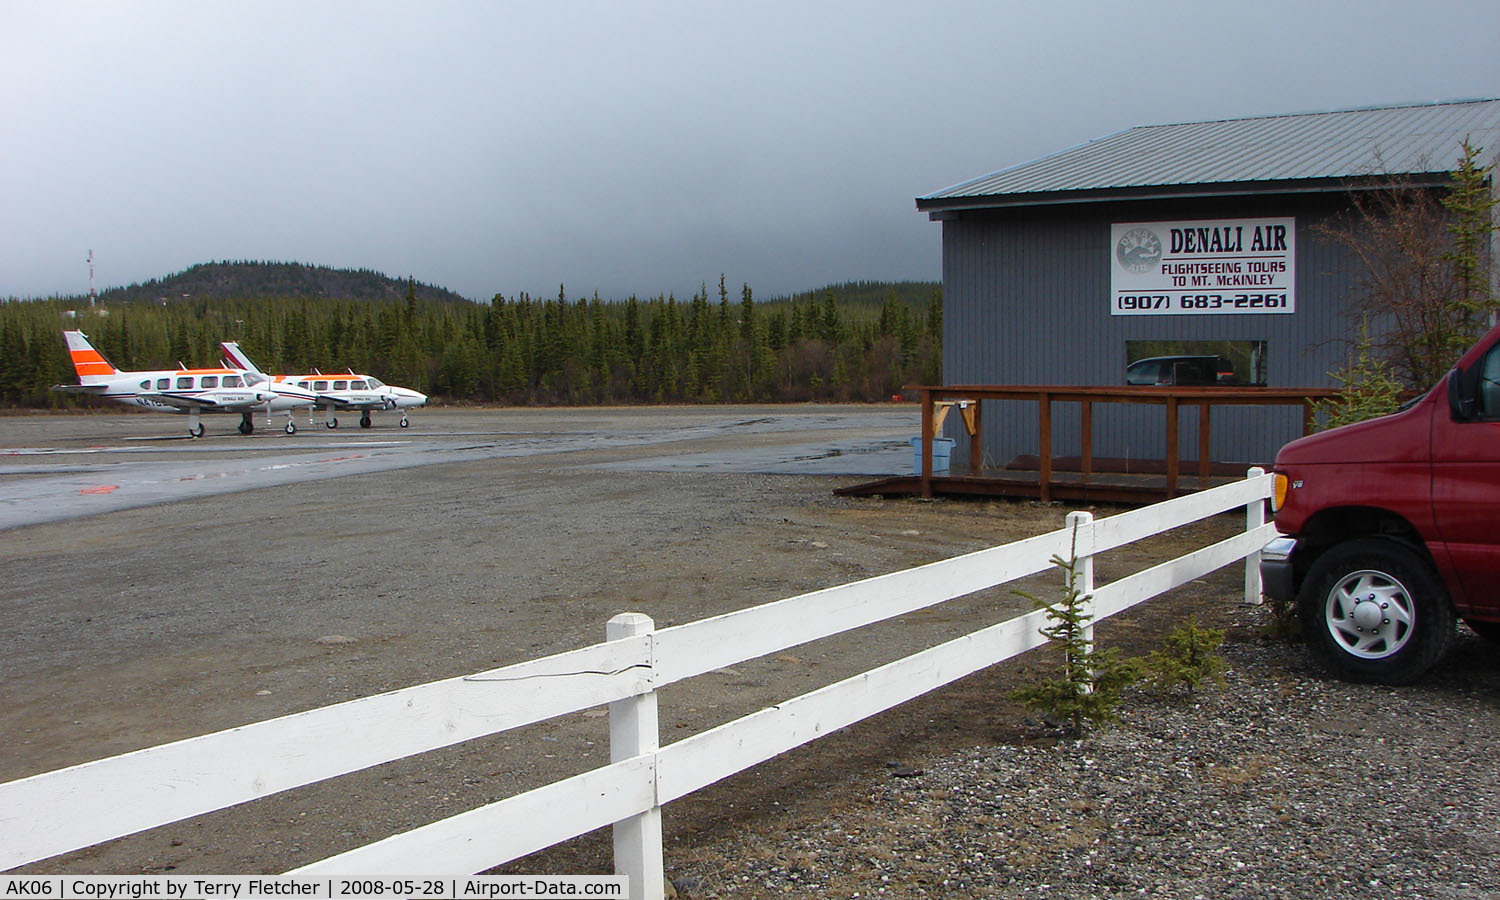 Denali Airport (AK06) - Denali is a small airfield but base to a small number of flightseeing Air Taxis